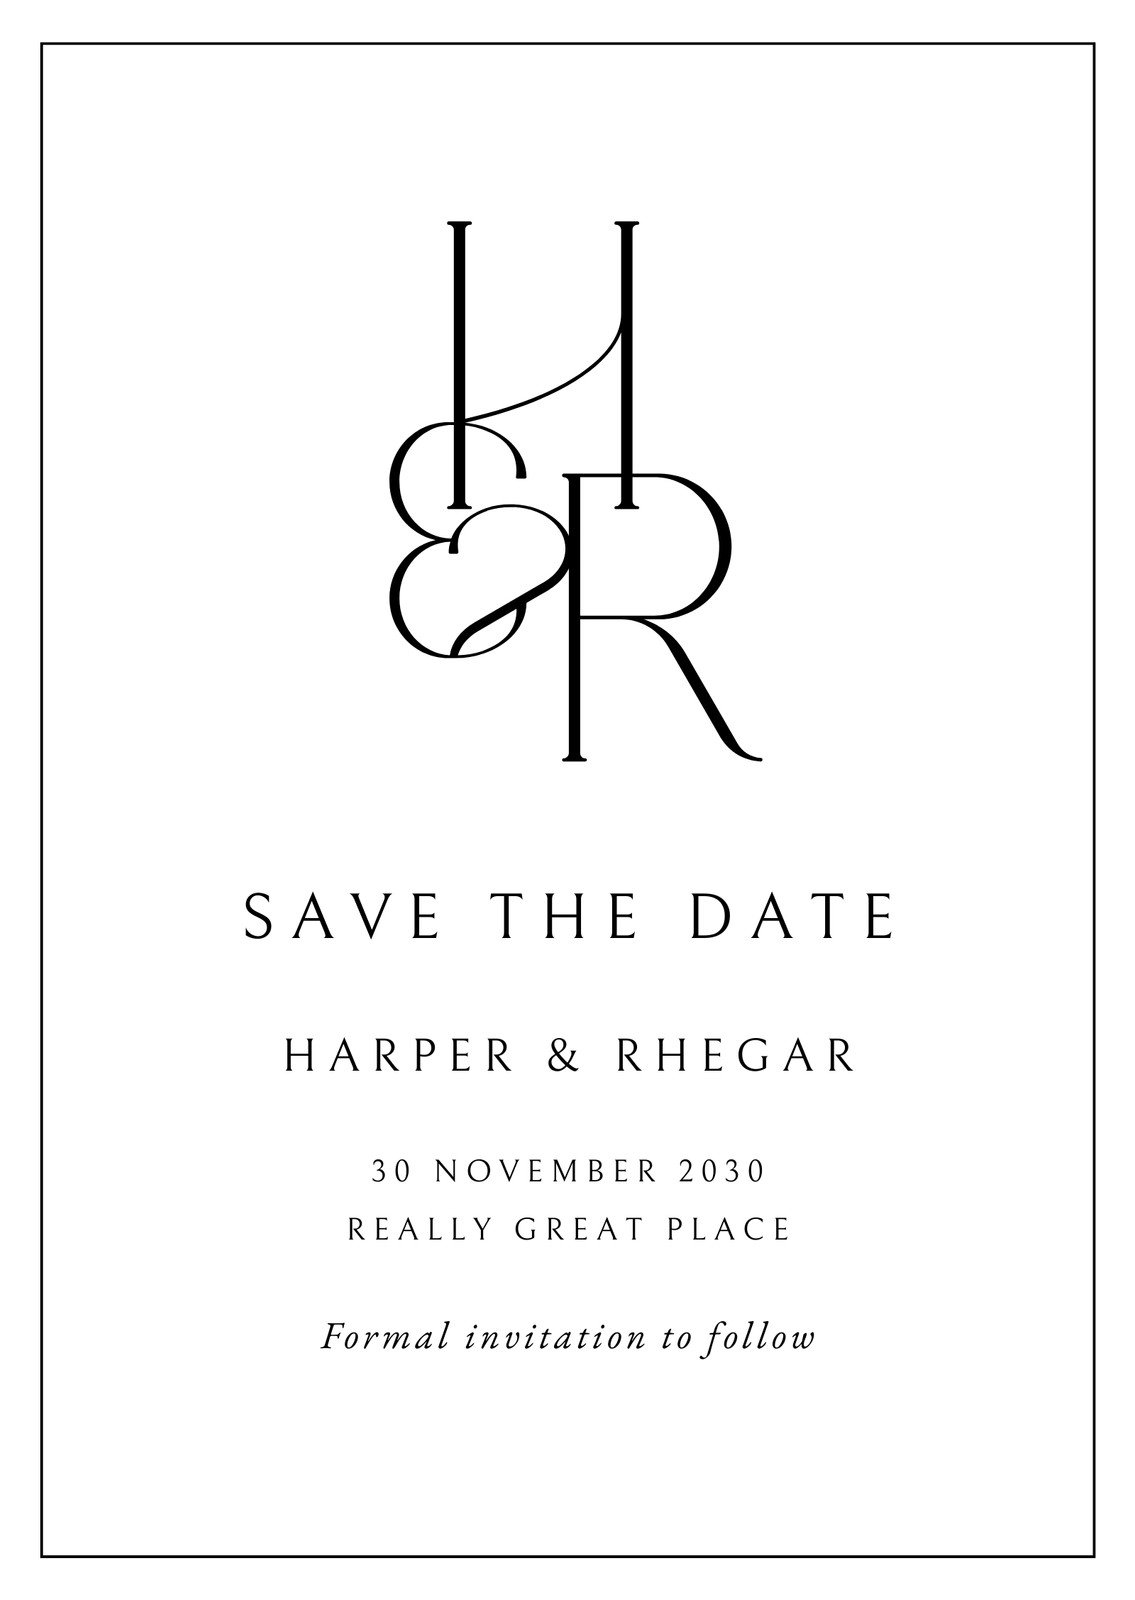 Save the date Sticker for Sale by Best-Designers